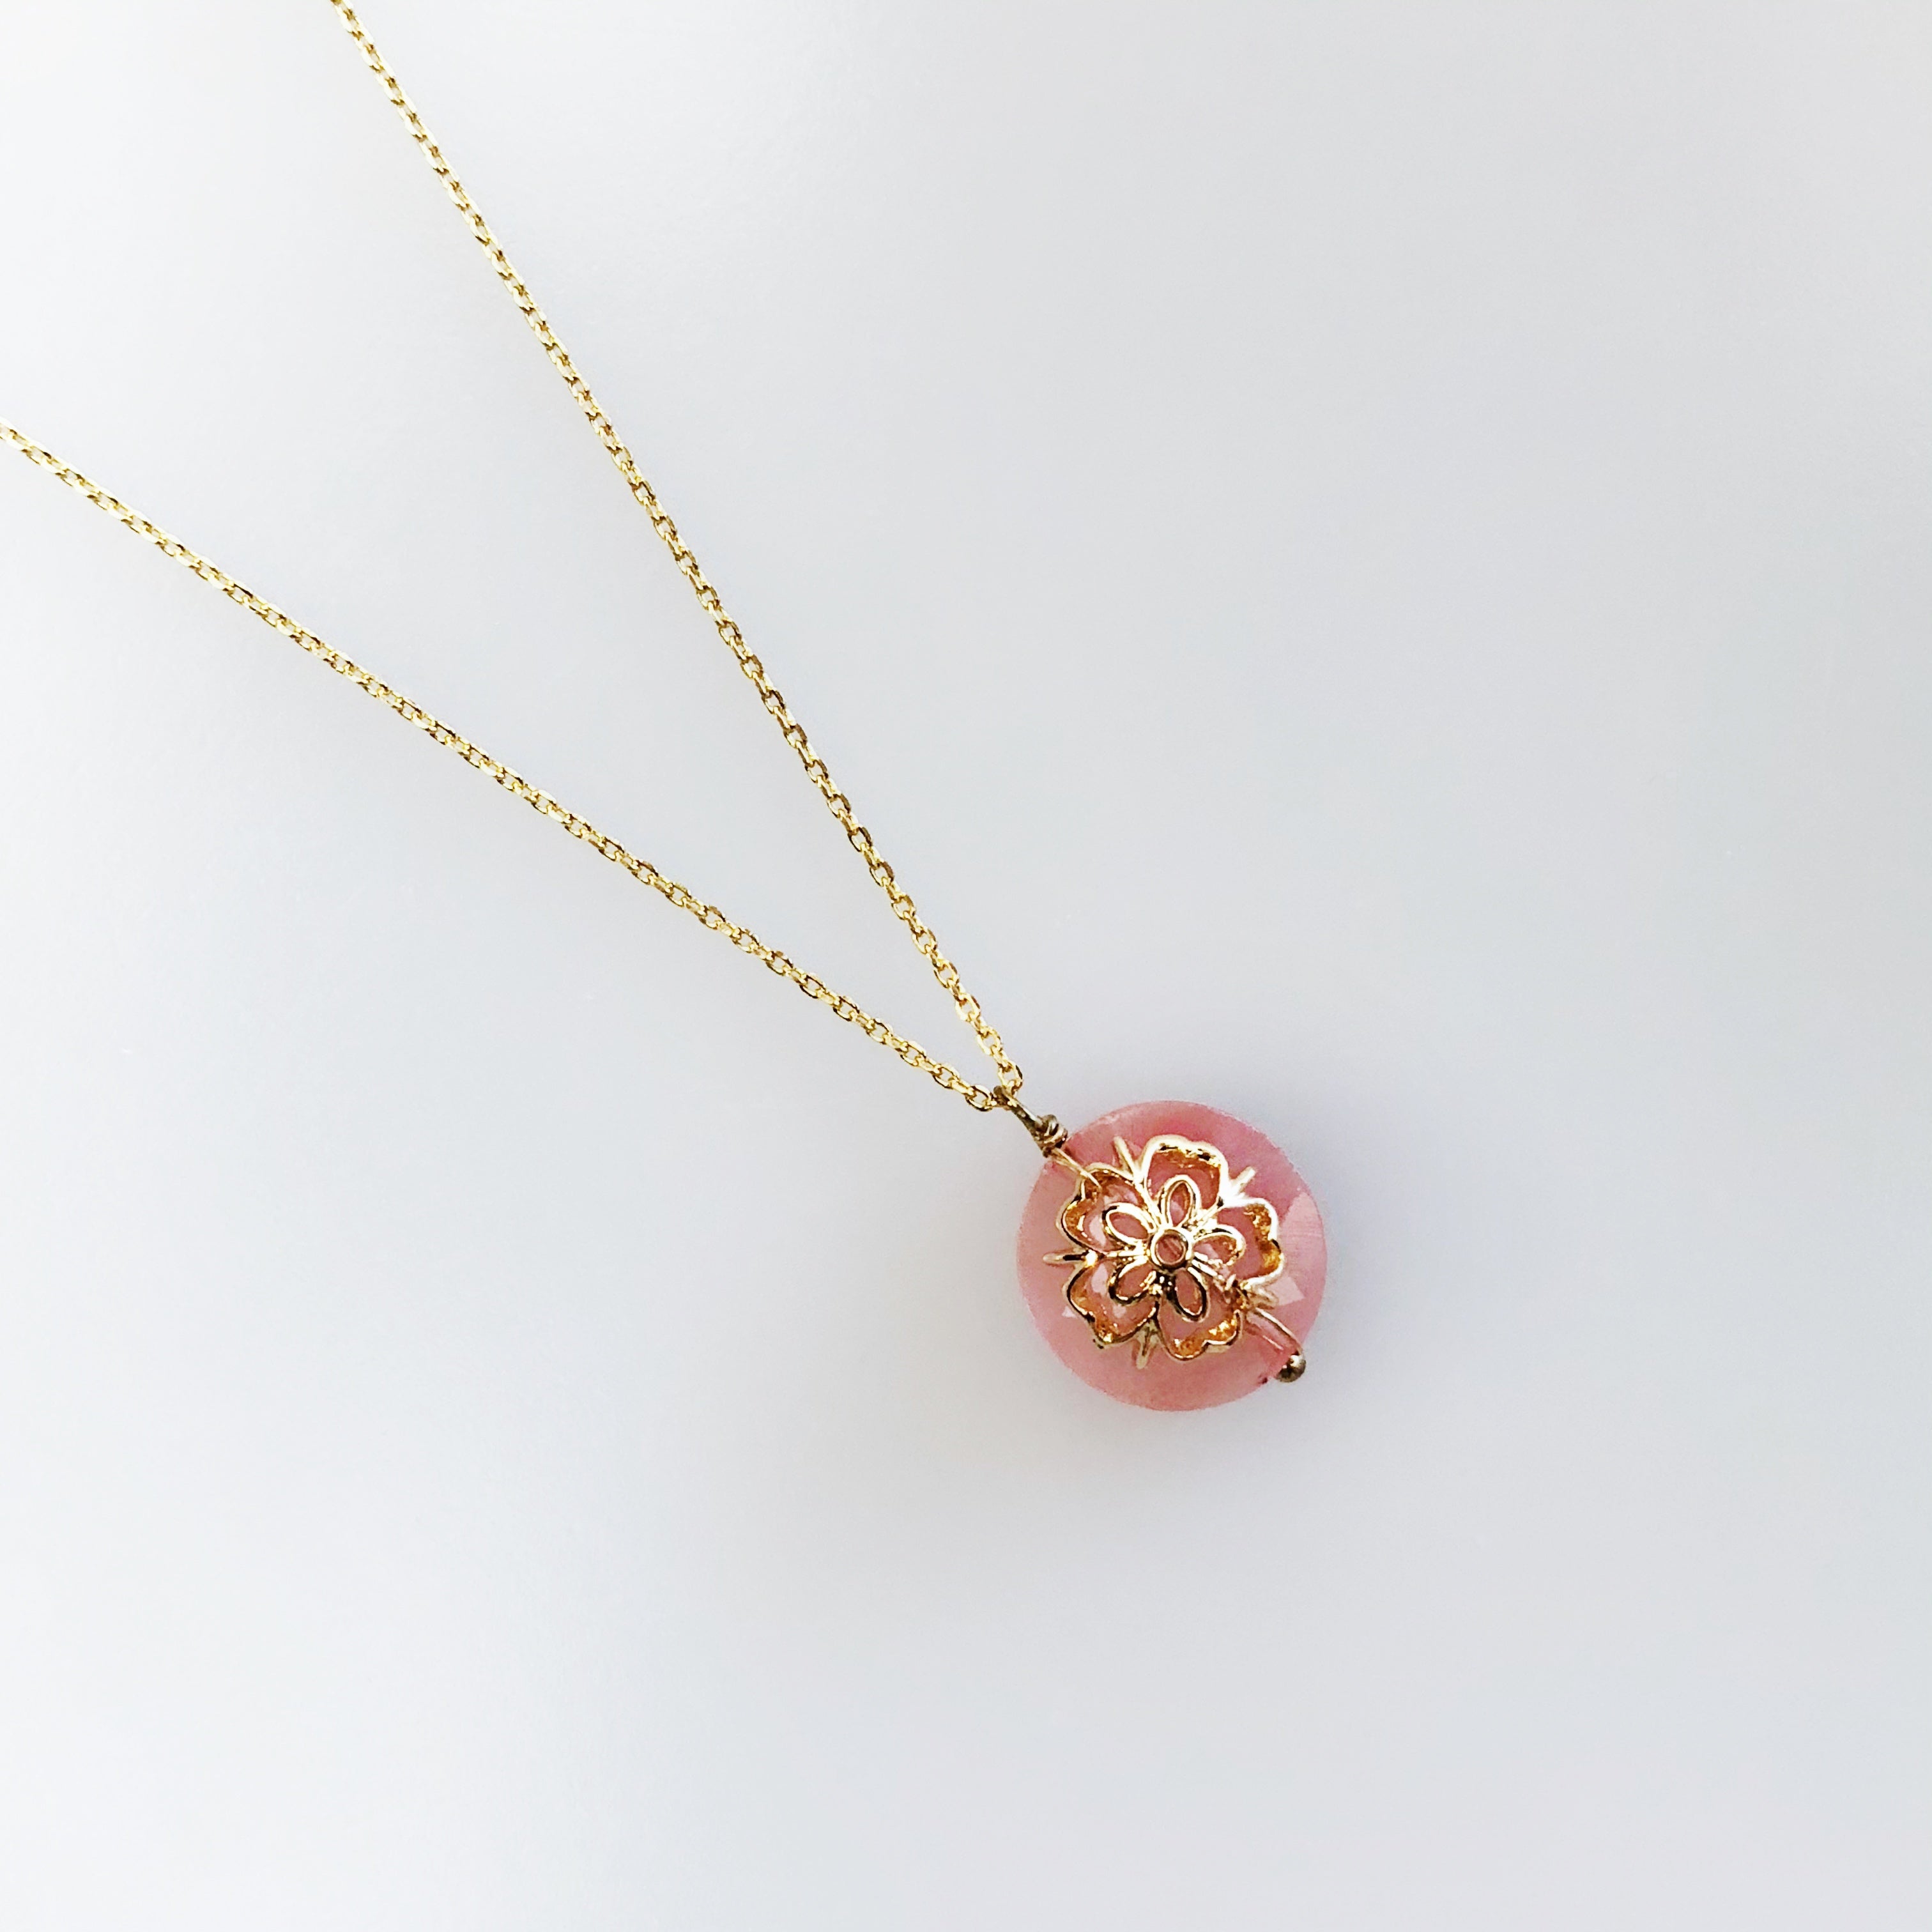 Plum Blossom Necklace in Rose Quartz, Asian Boutique Jewelry from New York